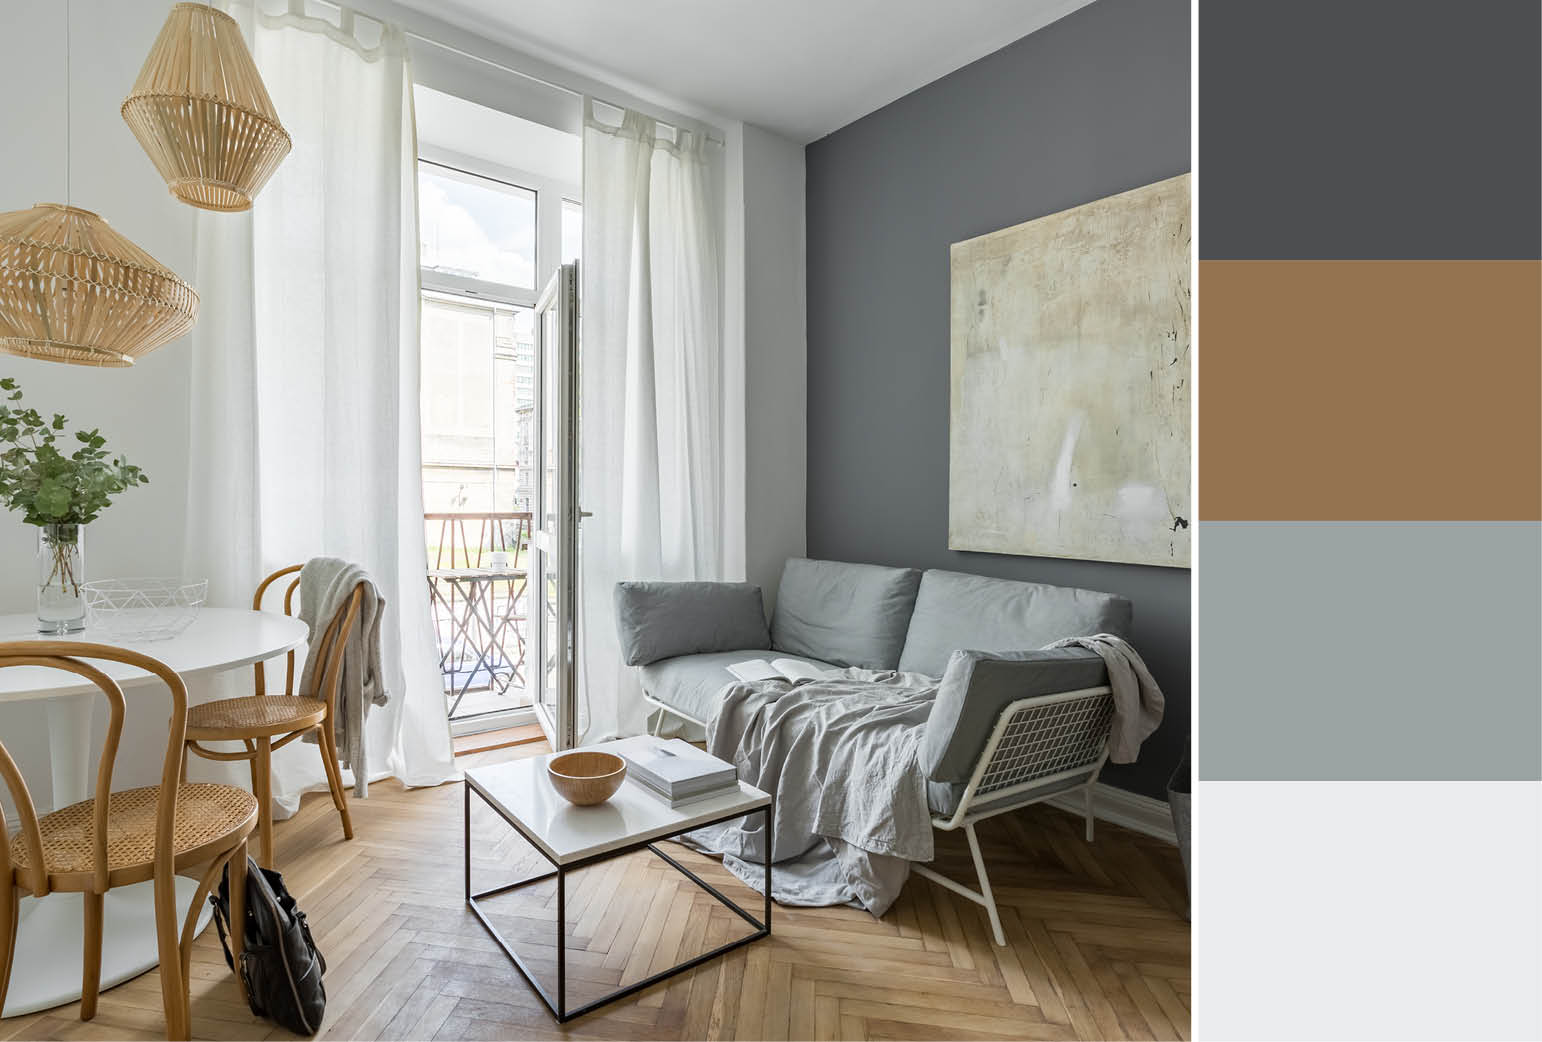 What Accent Colors Go With Gray Walls